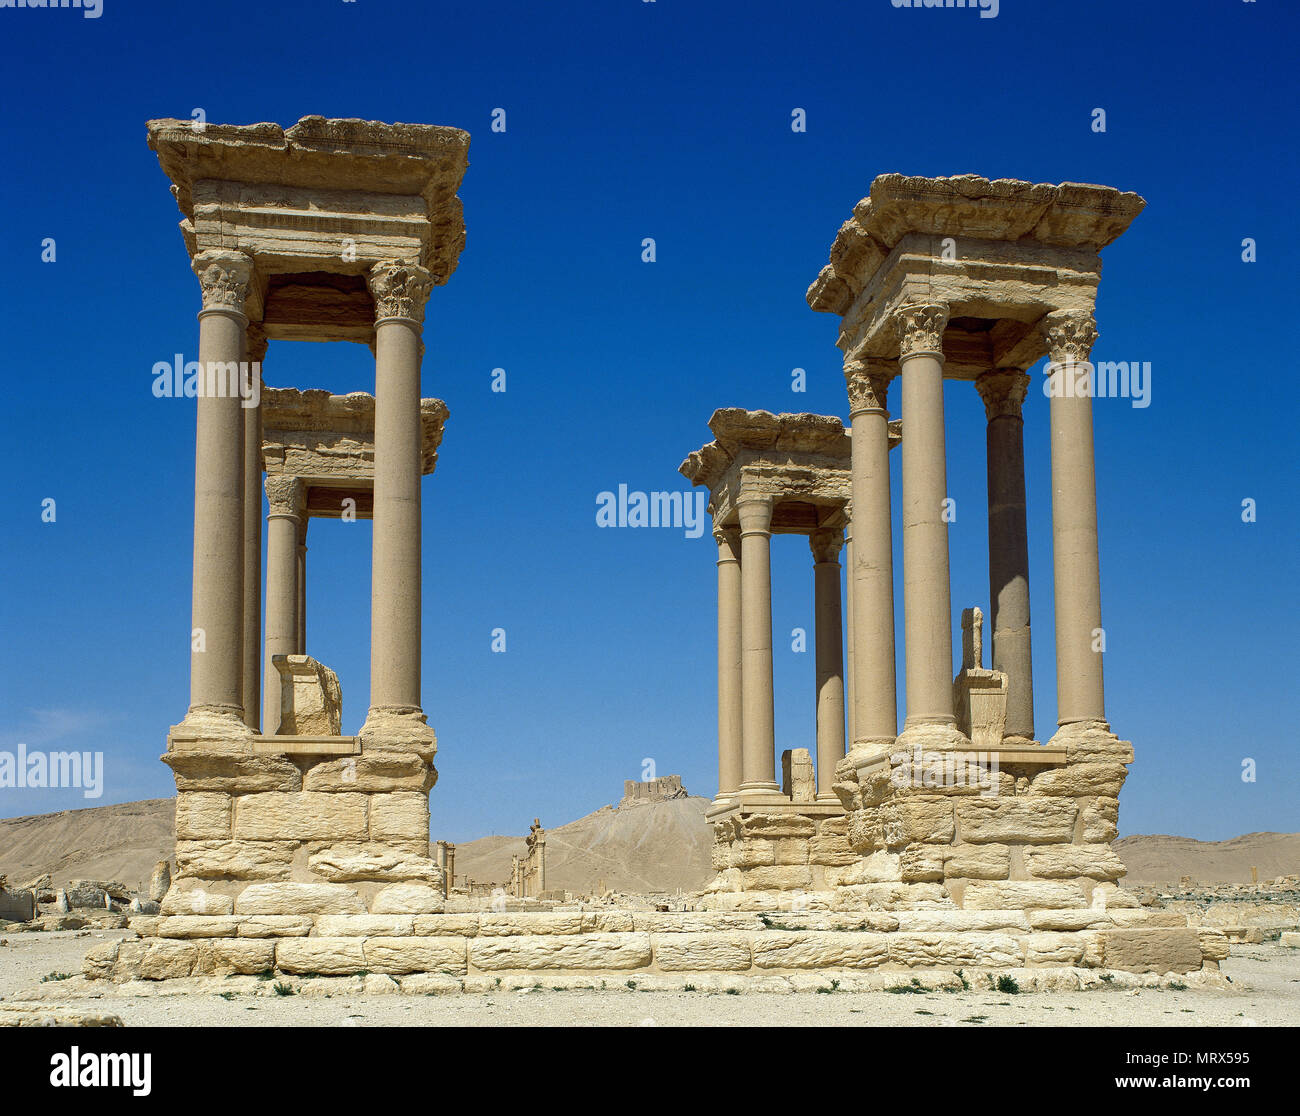 Palmyra, Syria. The Tetrapylon. Ancient type of monument of cubic shape with a gate on each of the four sides. Photo taken before Syrian Civil War. Stock Photo